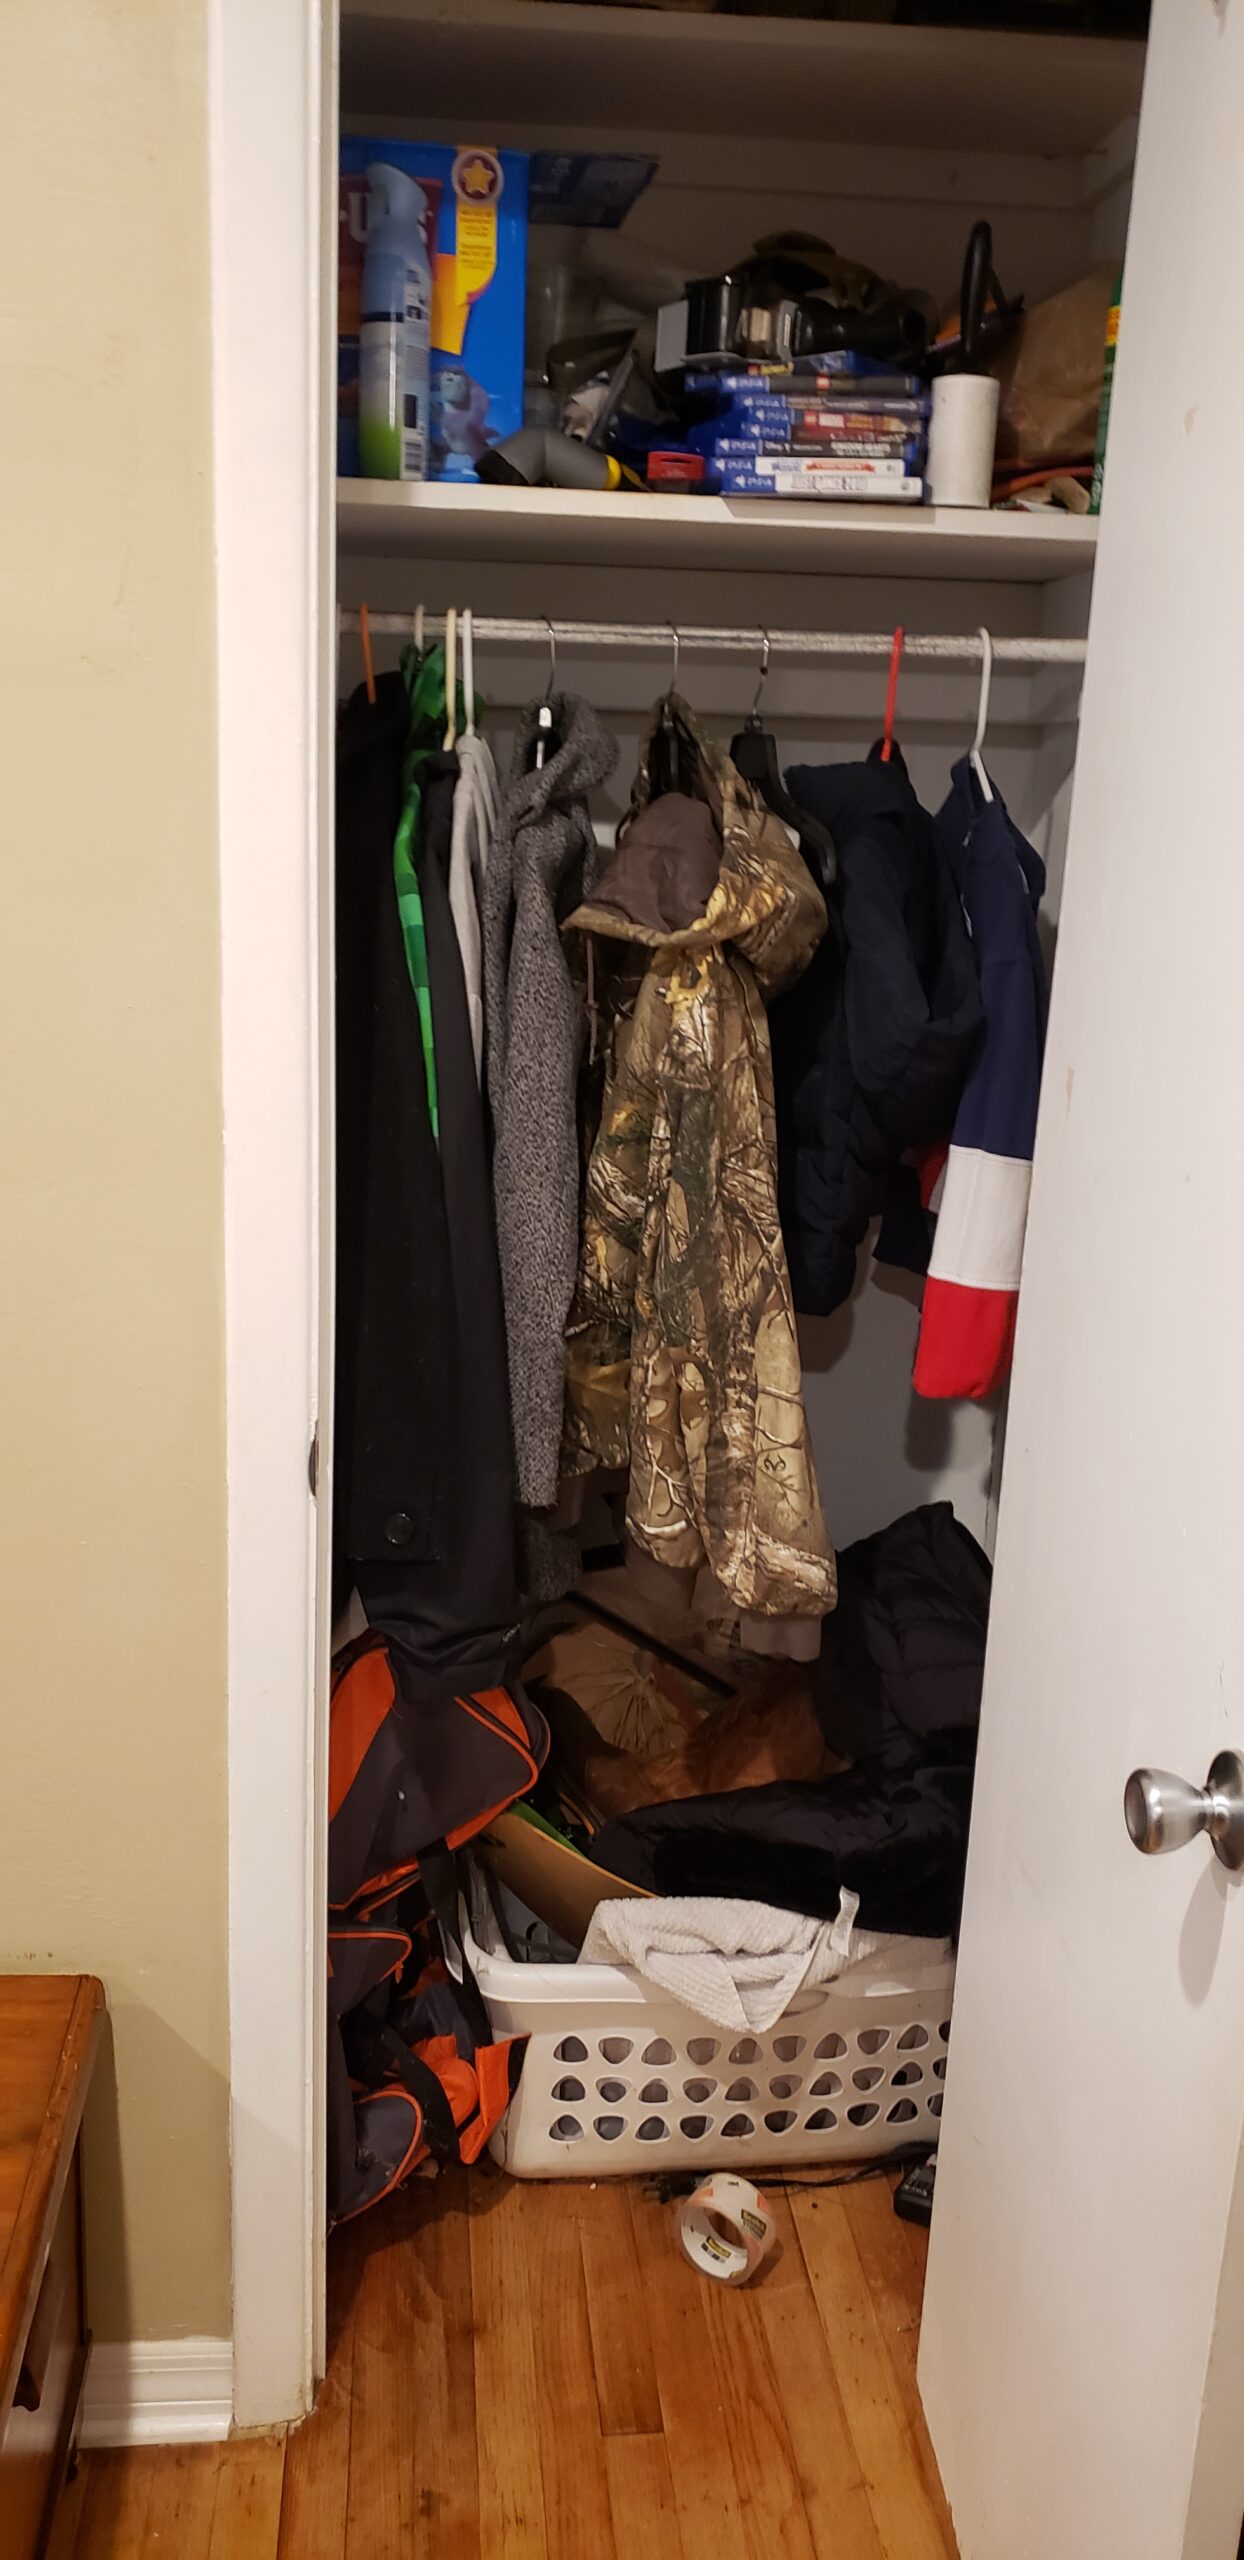 Picture is decorative. It shows a closet full of clothes and a floor covered. When prepping a home for sale, clean out closets because buyers will open them!